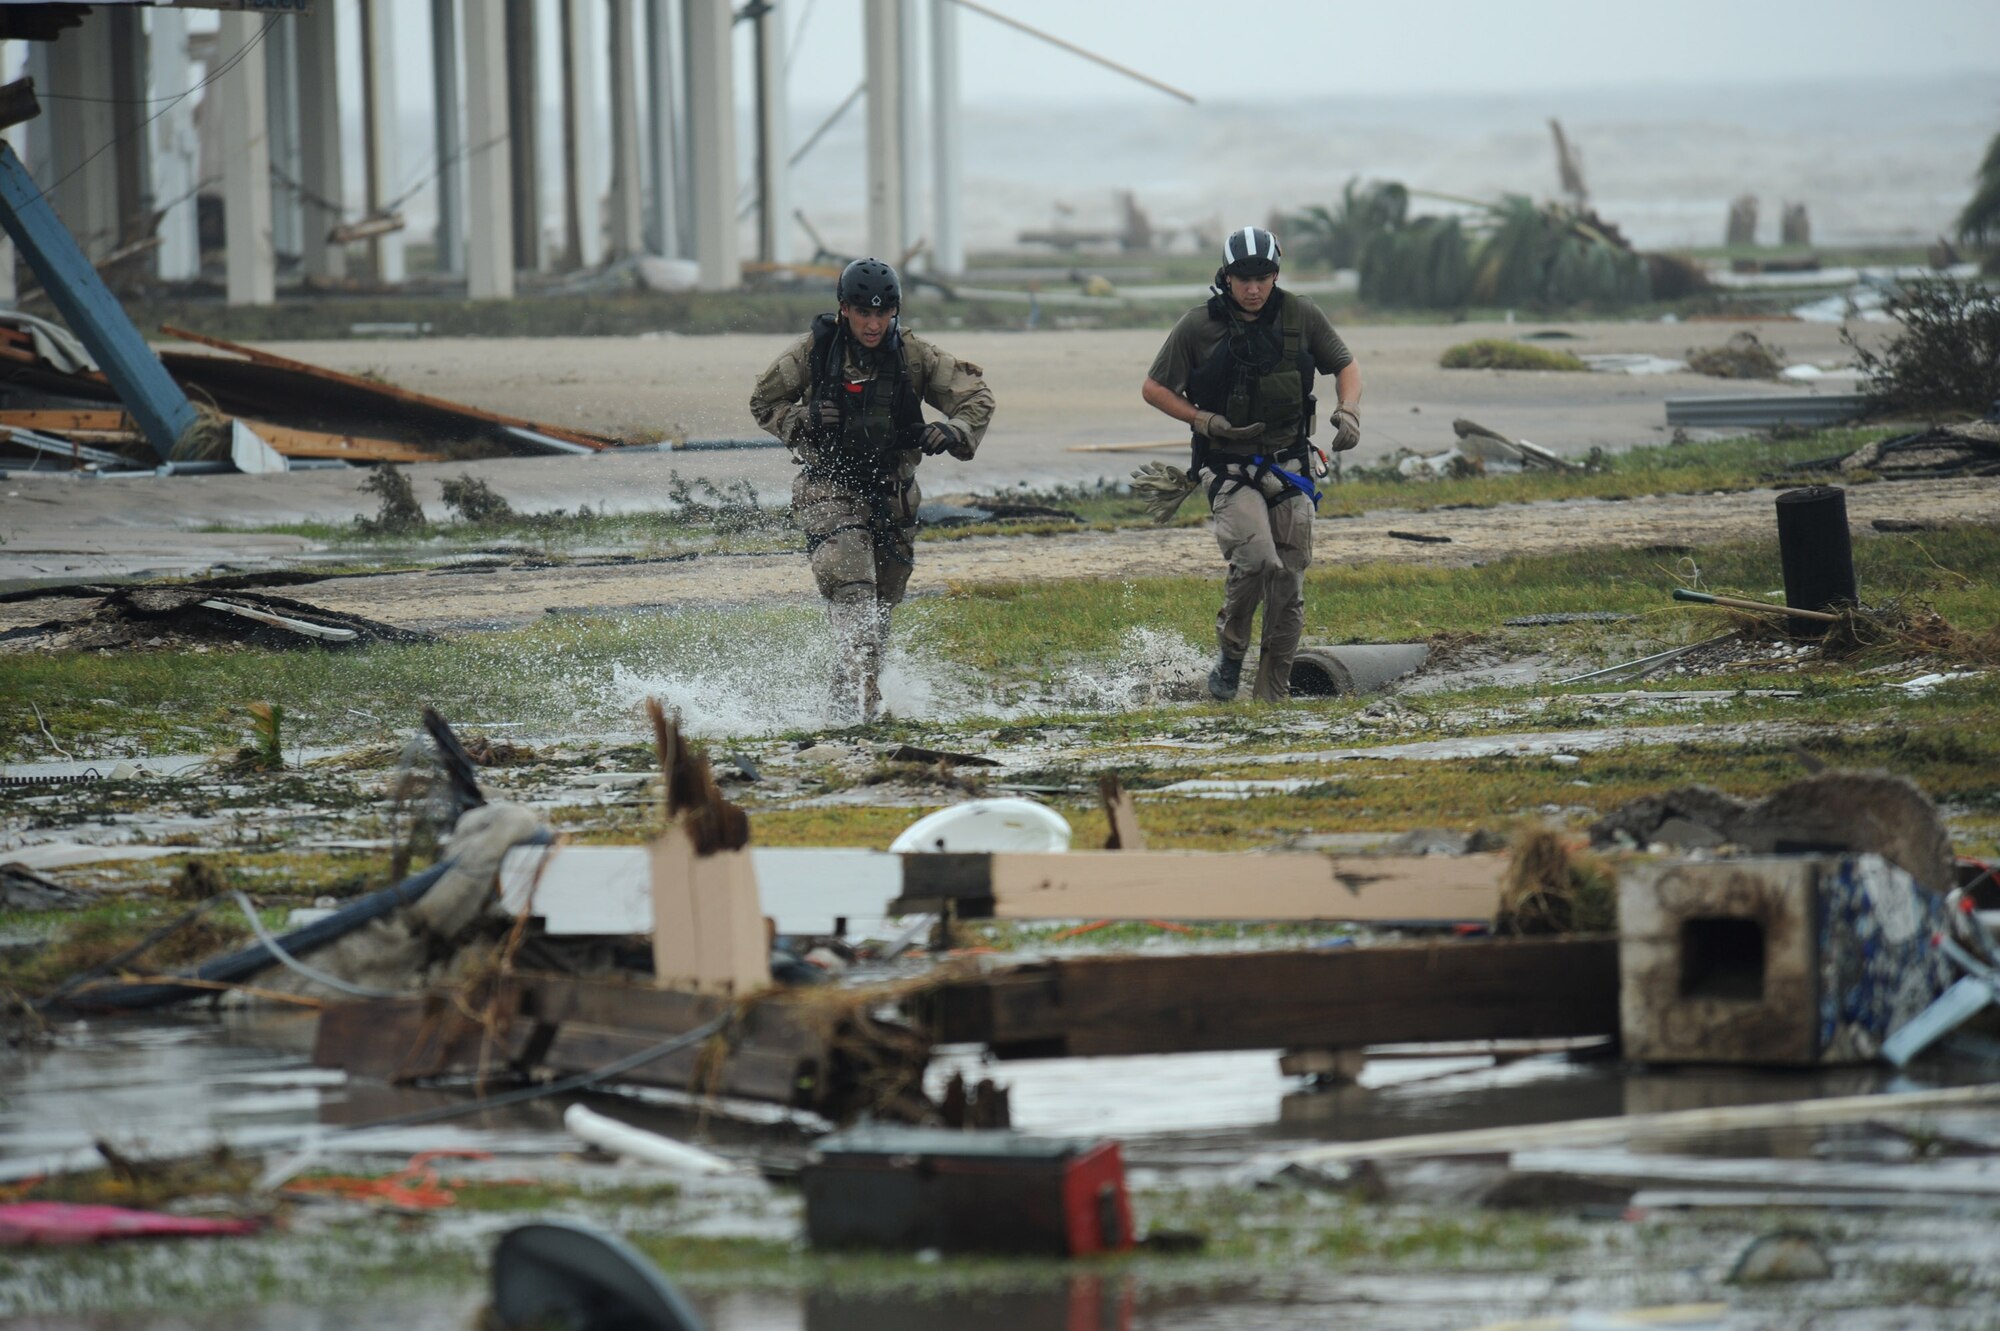 Staff Sgt. Lopaka Mounts (left) and Senior Airman Brandon Smith run through a flooded portion of Galveston, Texas, searching for residents needing help during search and rescue operations after Hurricane Ike, Sept. 13. Sergeant Mounts and Airman Smith are both pararescueman assigned to the 331st Air Expeditionary Group at Randolph Air Force Base, Texas. (U.S. Air Force photo/Staff Sgt. James L. Harper Jr.)